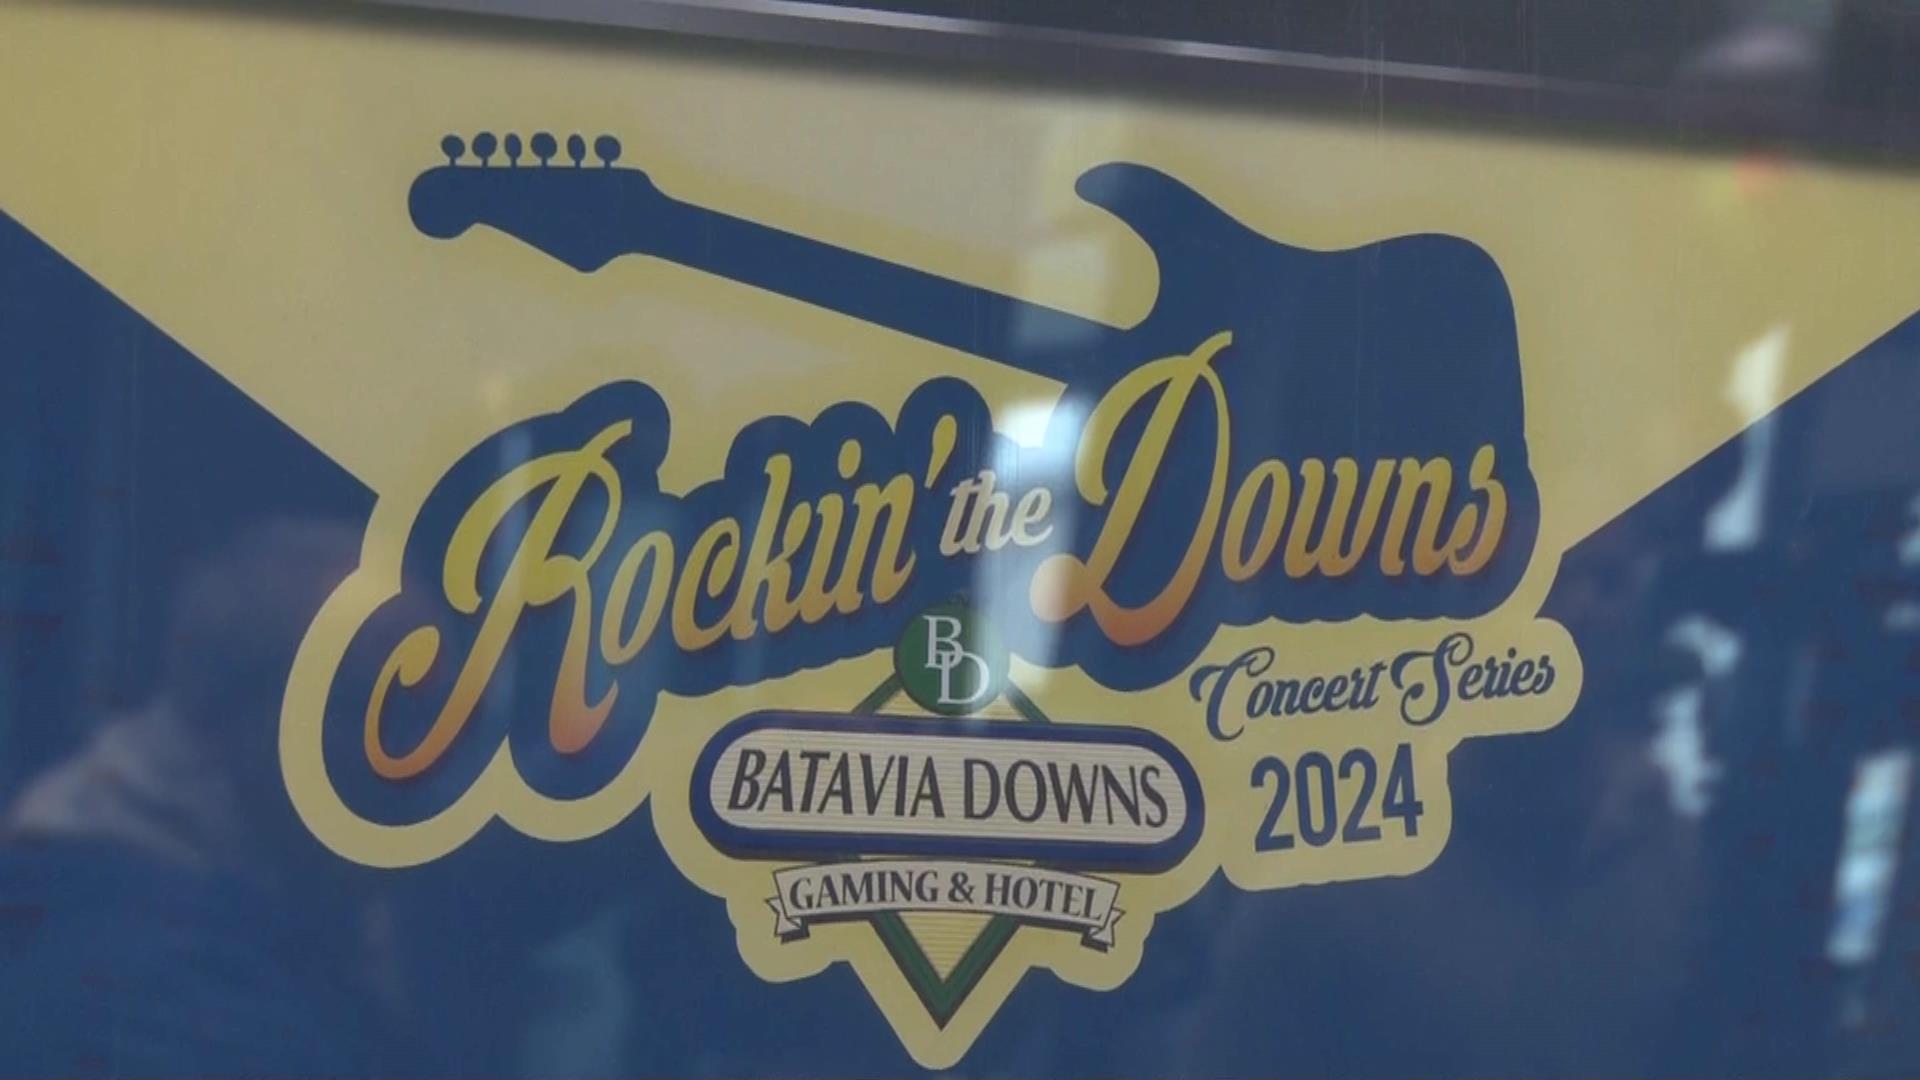 GENESEE COUNTY/Batavia Downs announces lineup for the 2024 “Rockin the